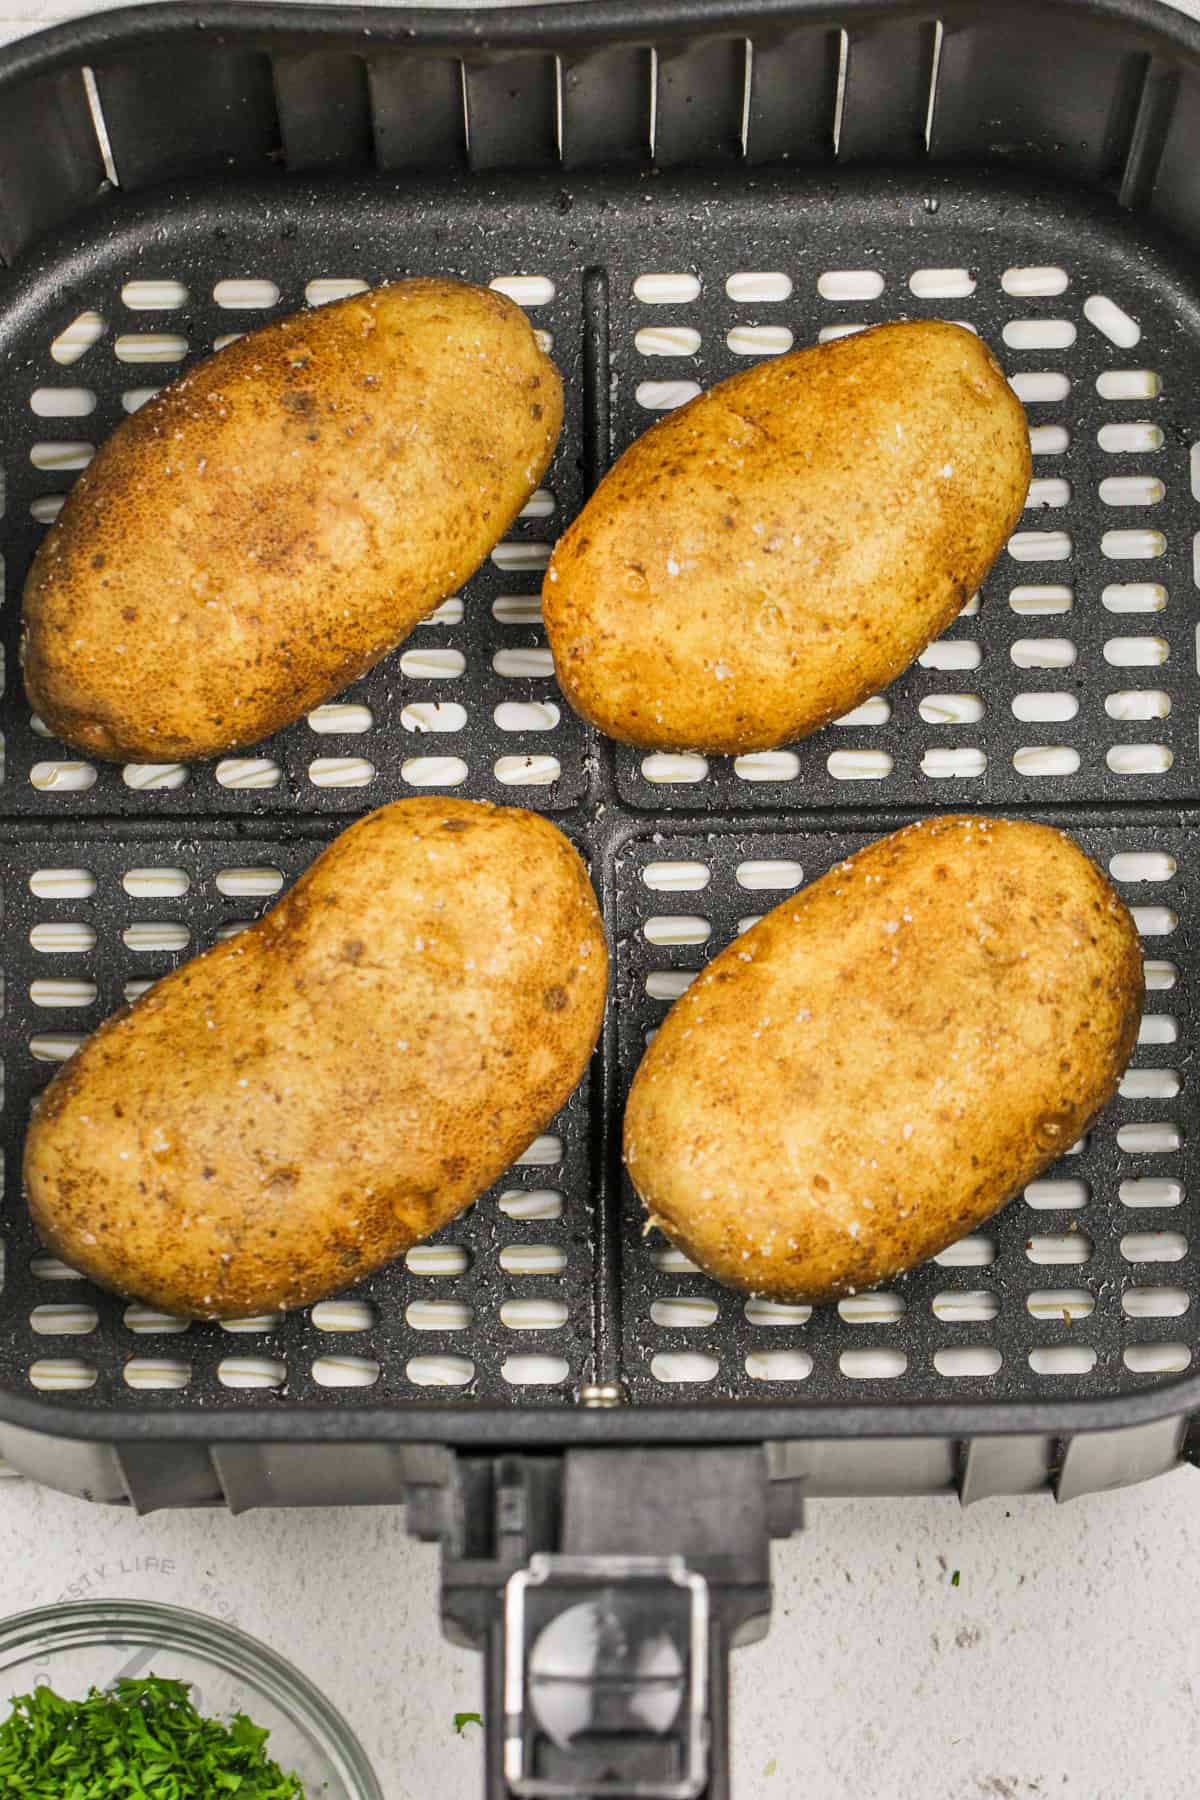 potatoes in the air fryer to make Air Fryer Baked Potatoes